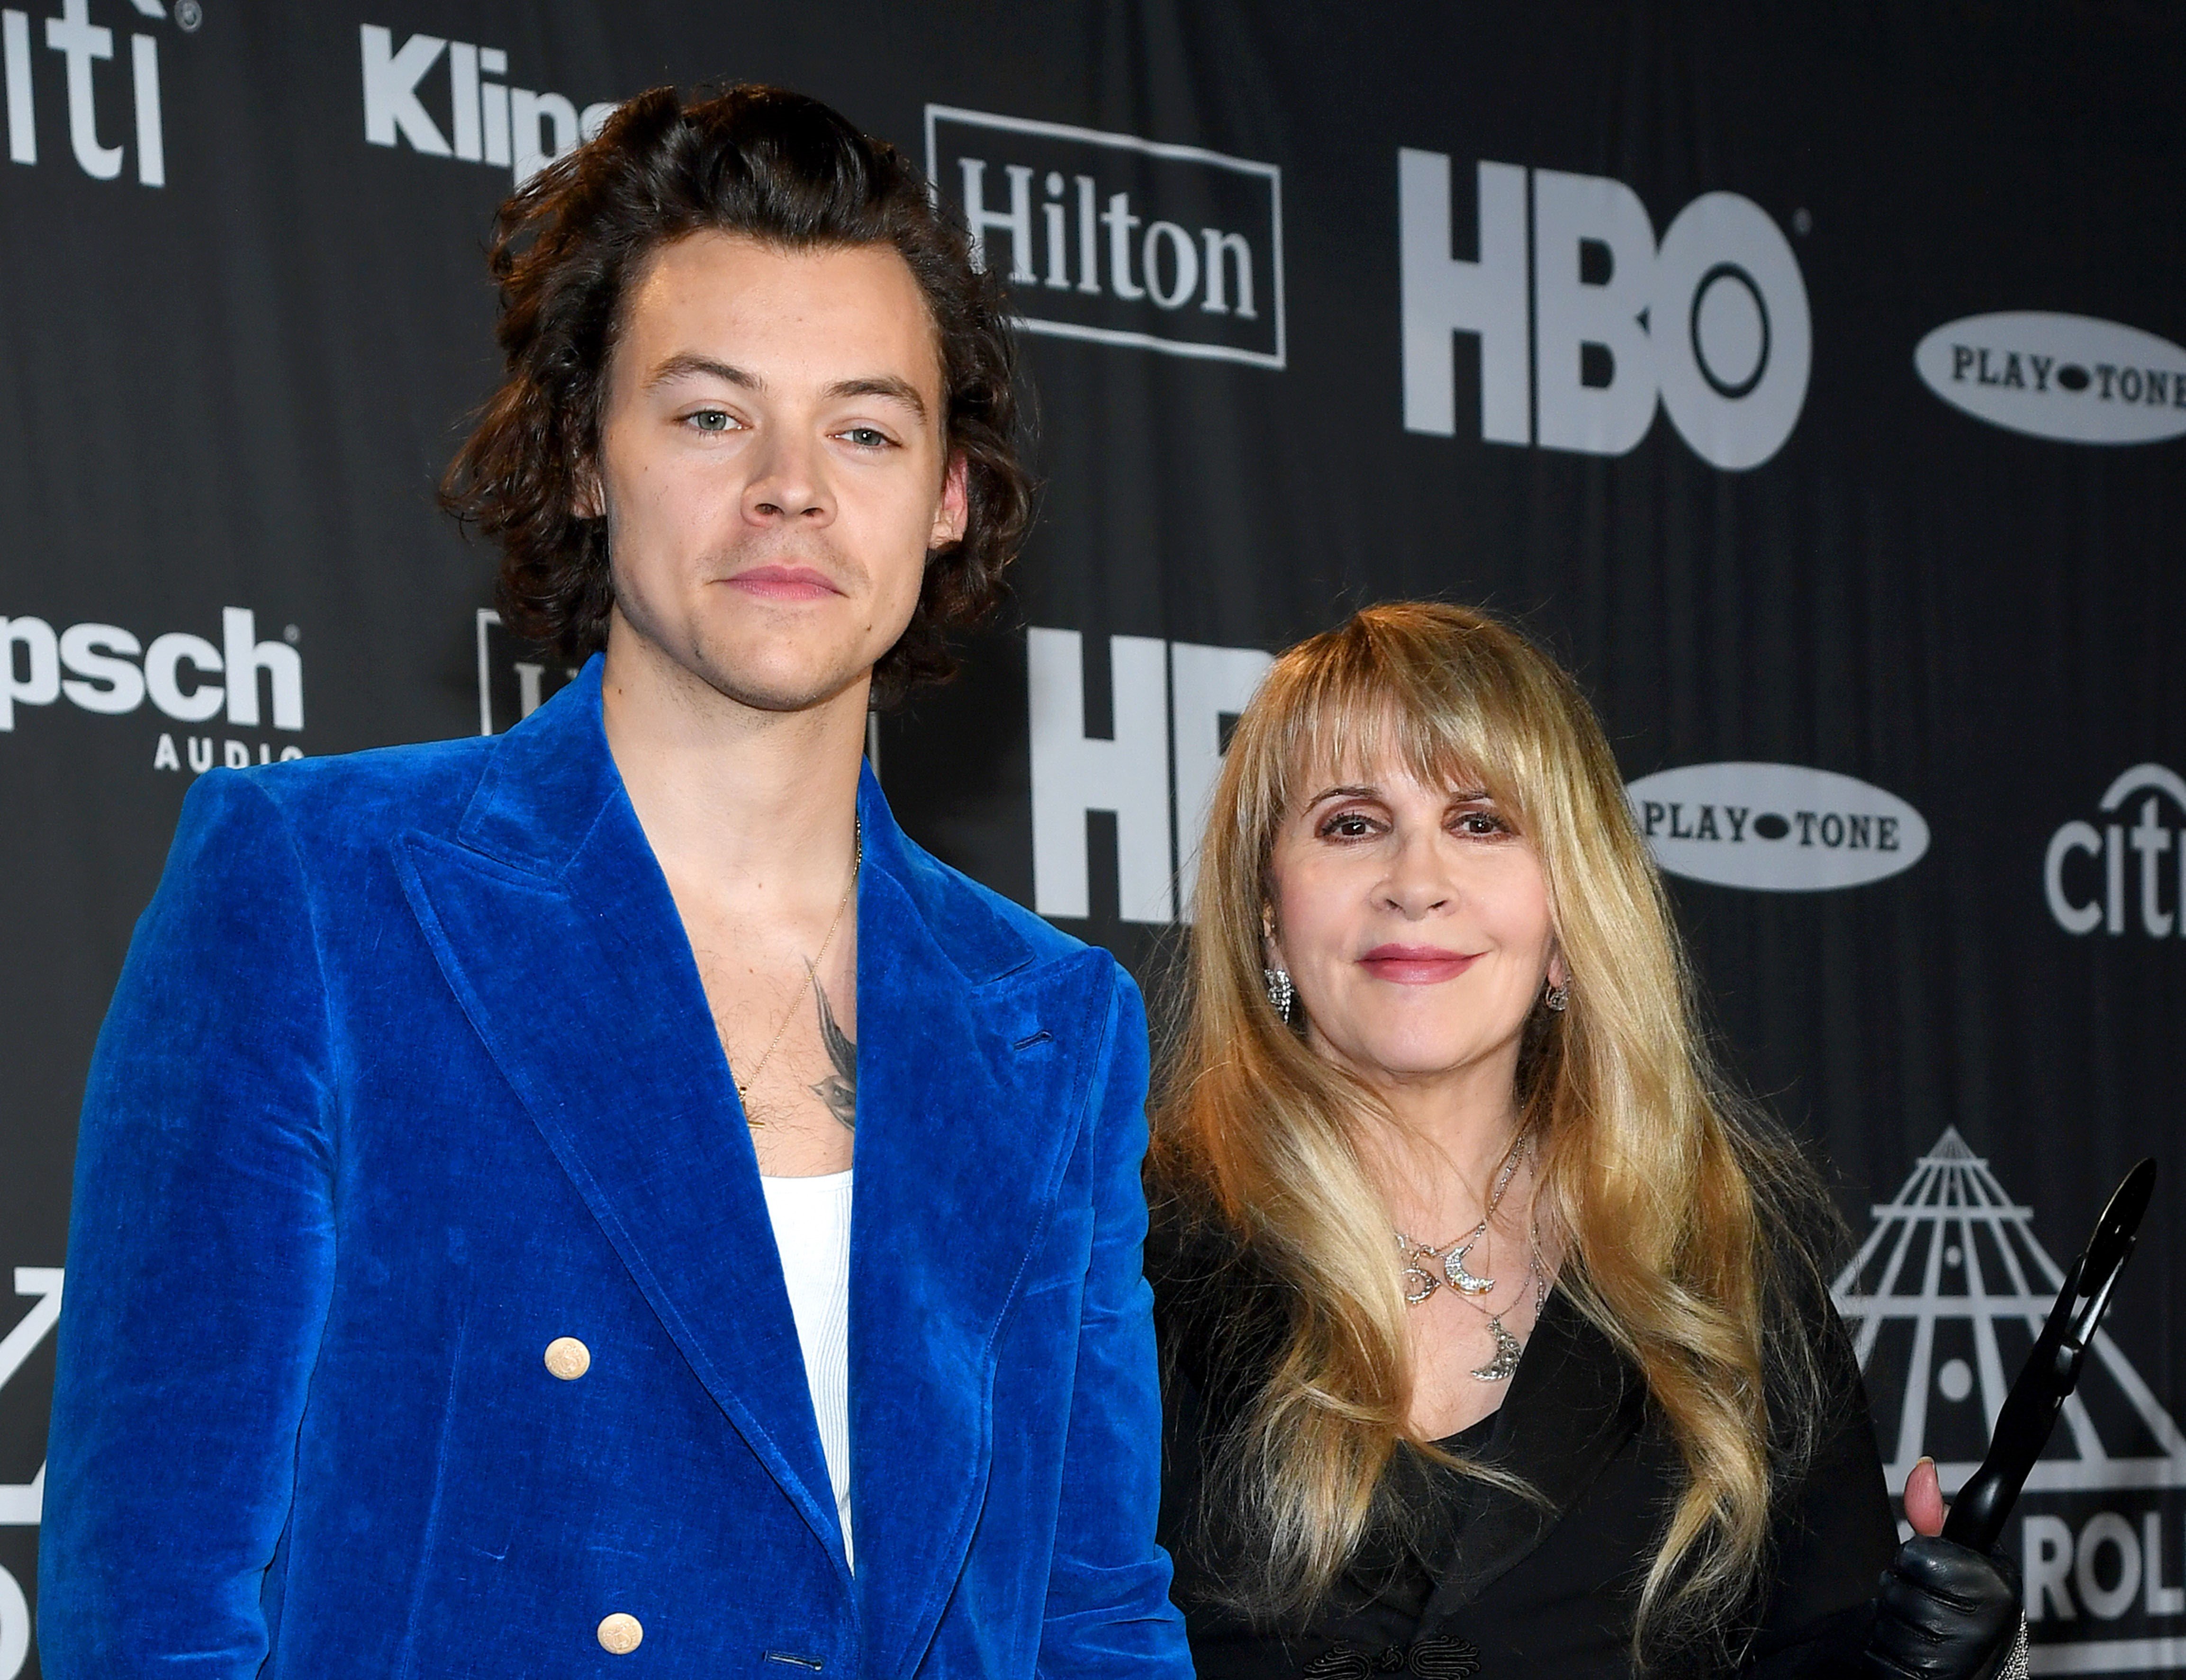 Harry Styles wears a blue suit and Stevie Nicks wears a black dress. They stand in front of a black background.